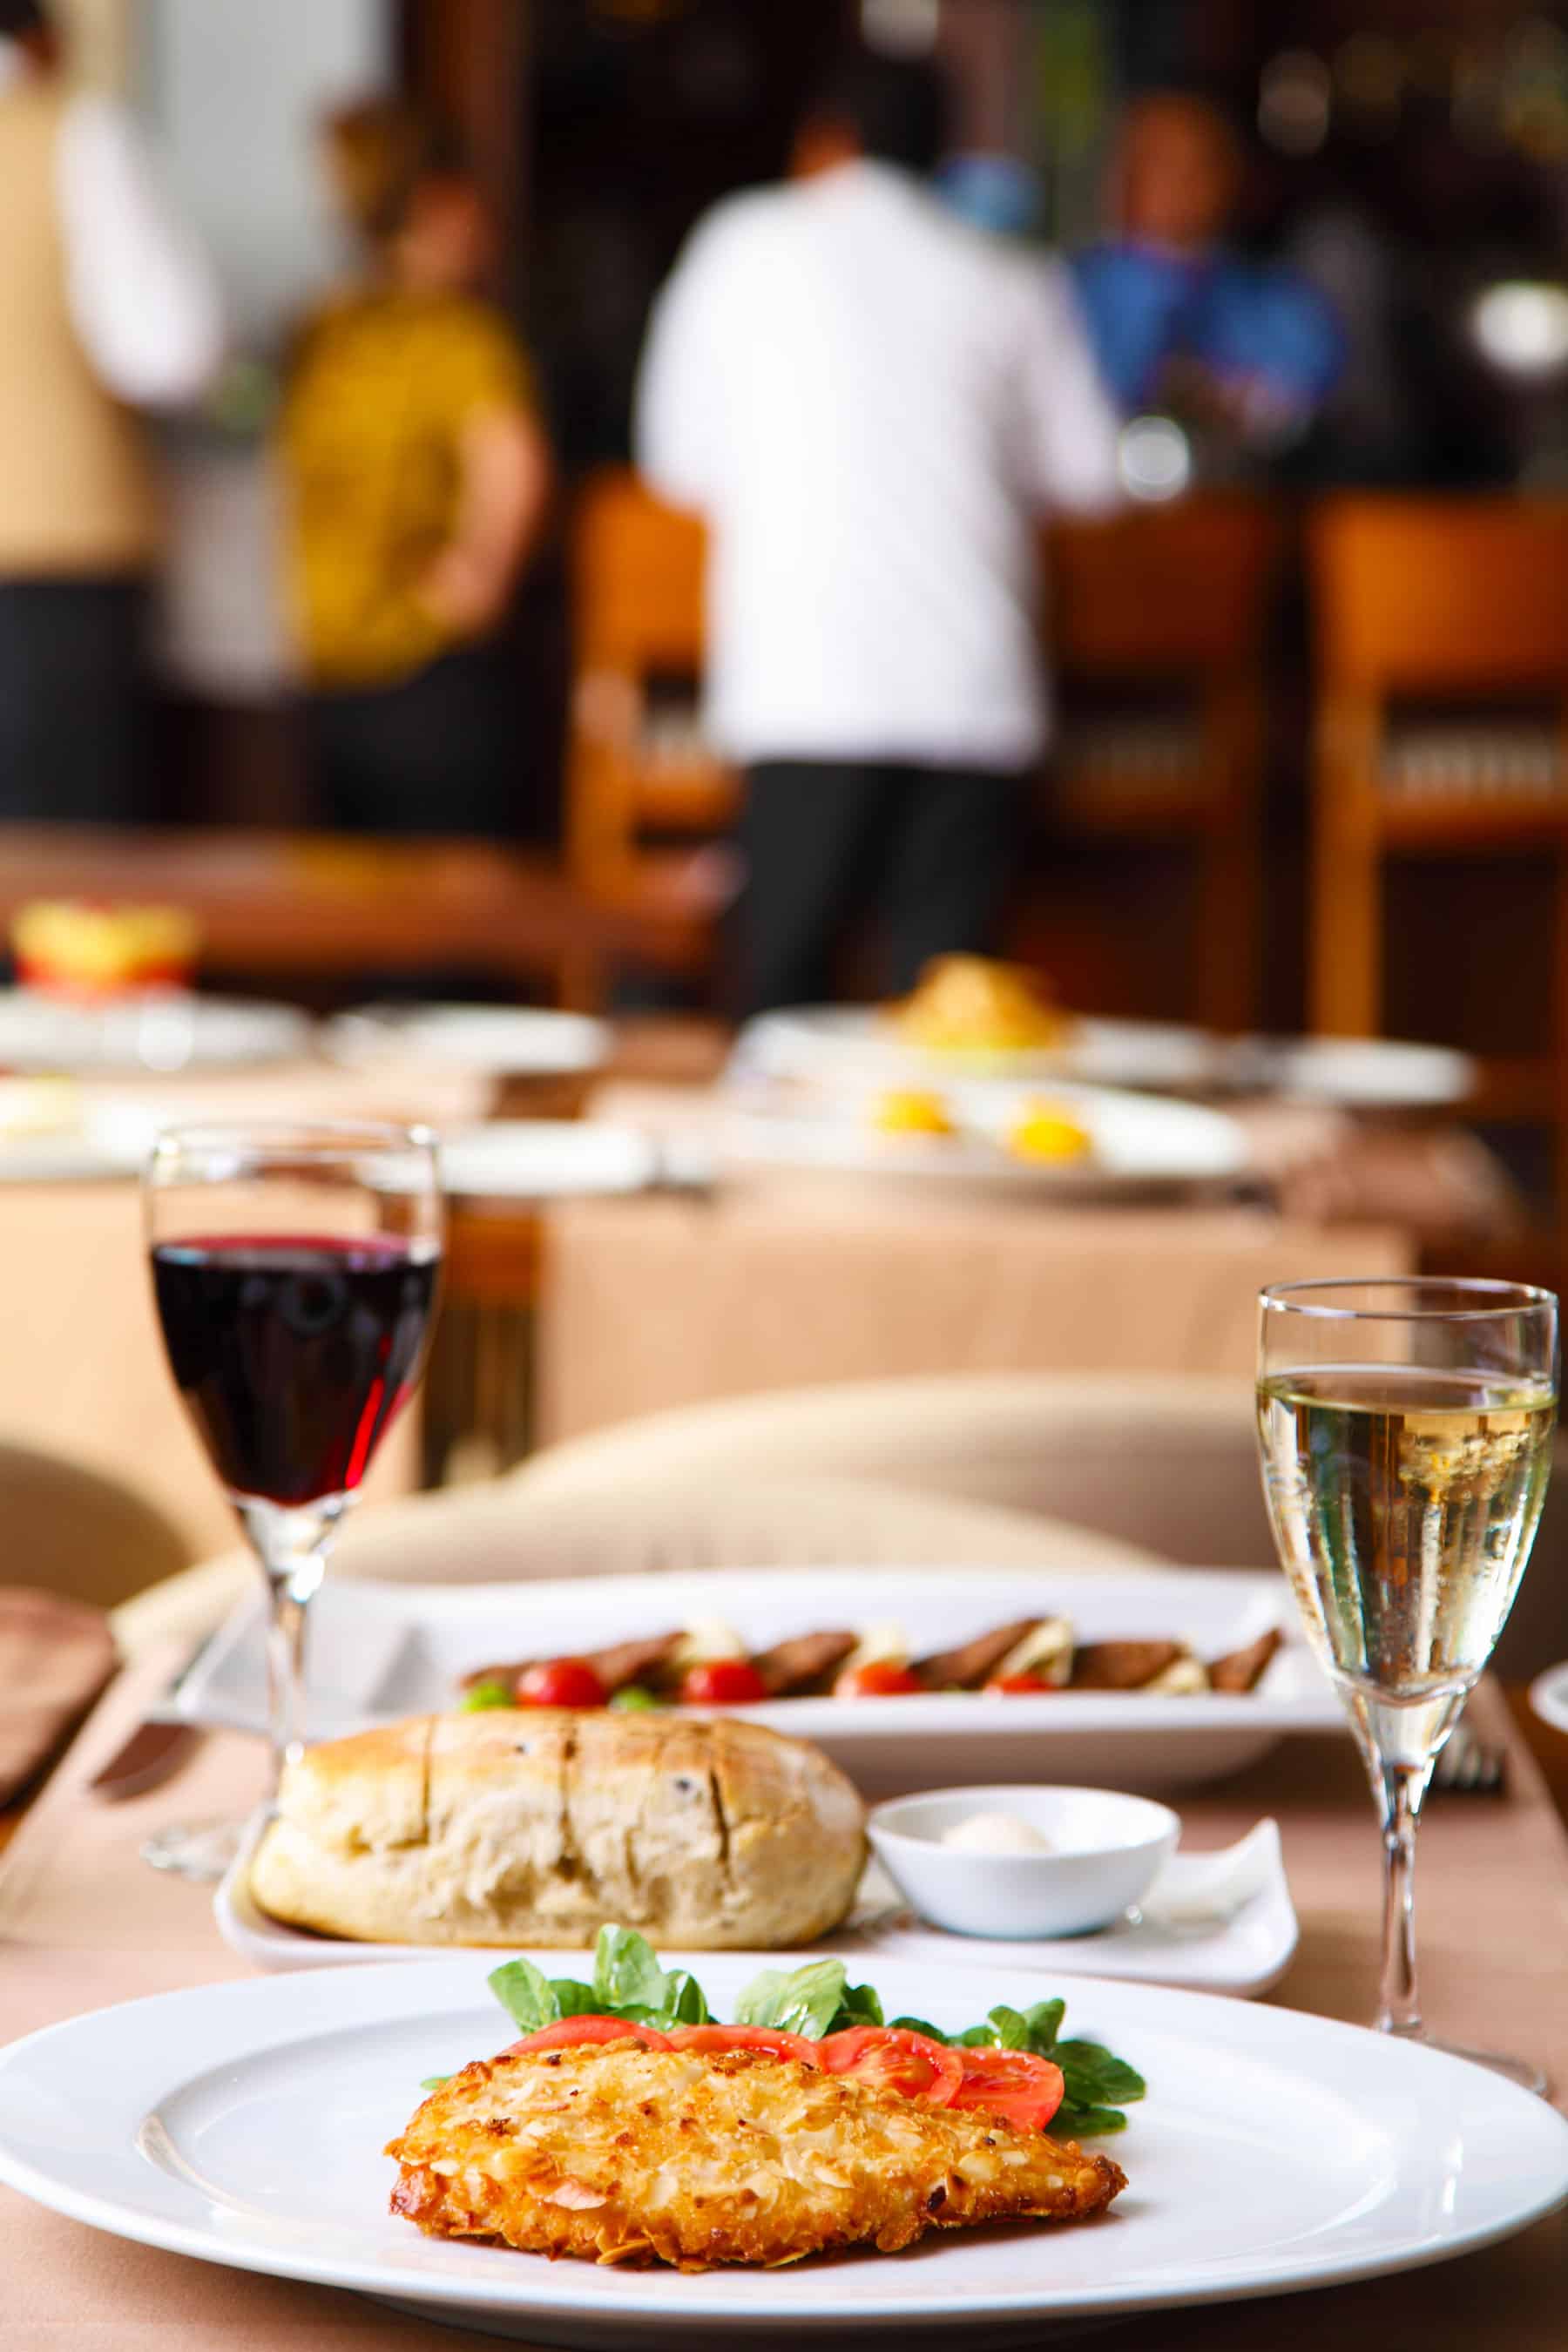 Tips For How to Save Money On Eating Out - Restaurant Photo with food and wine